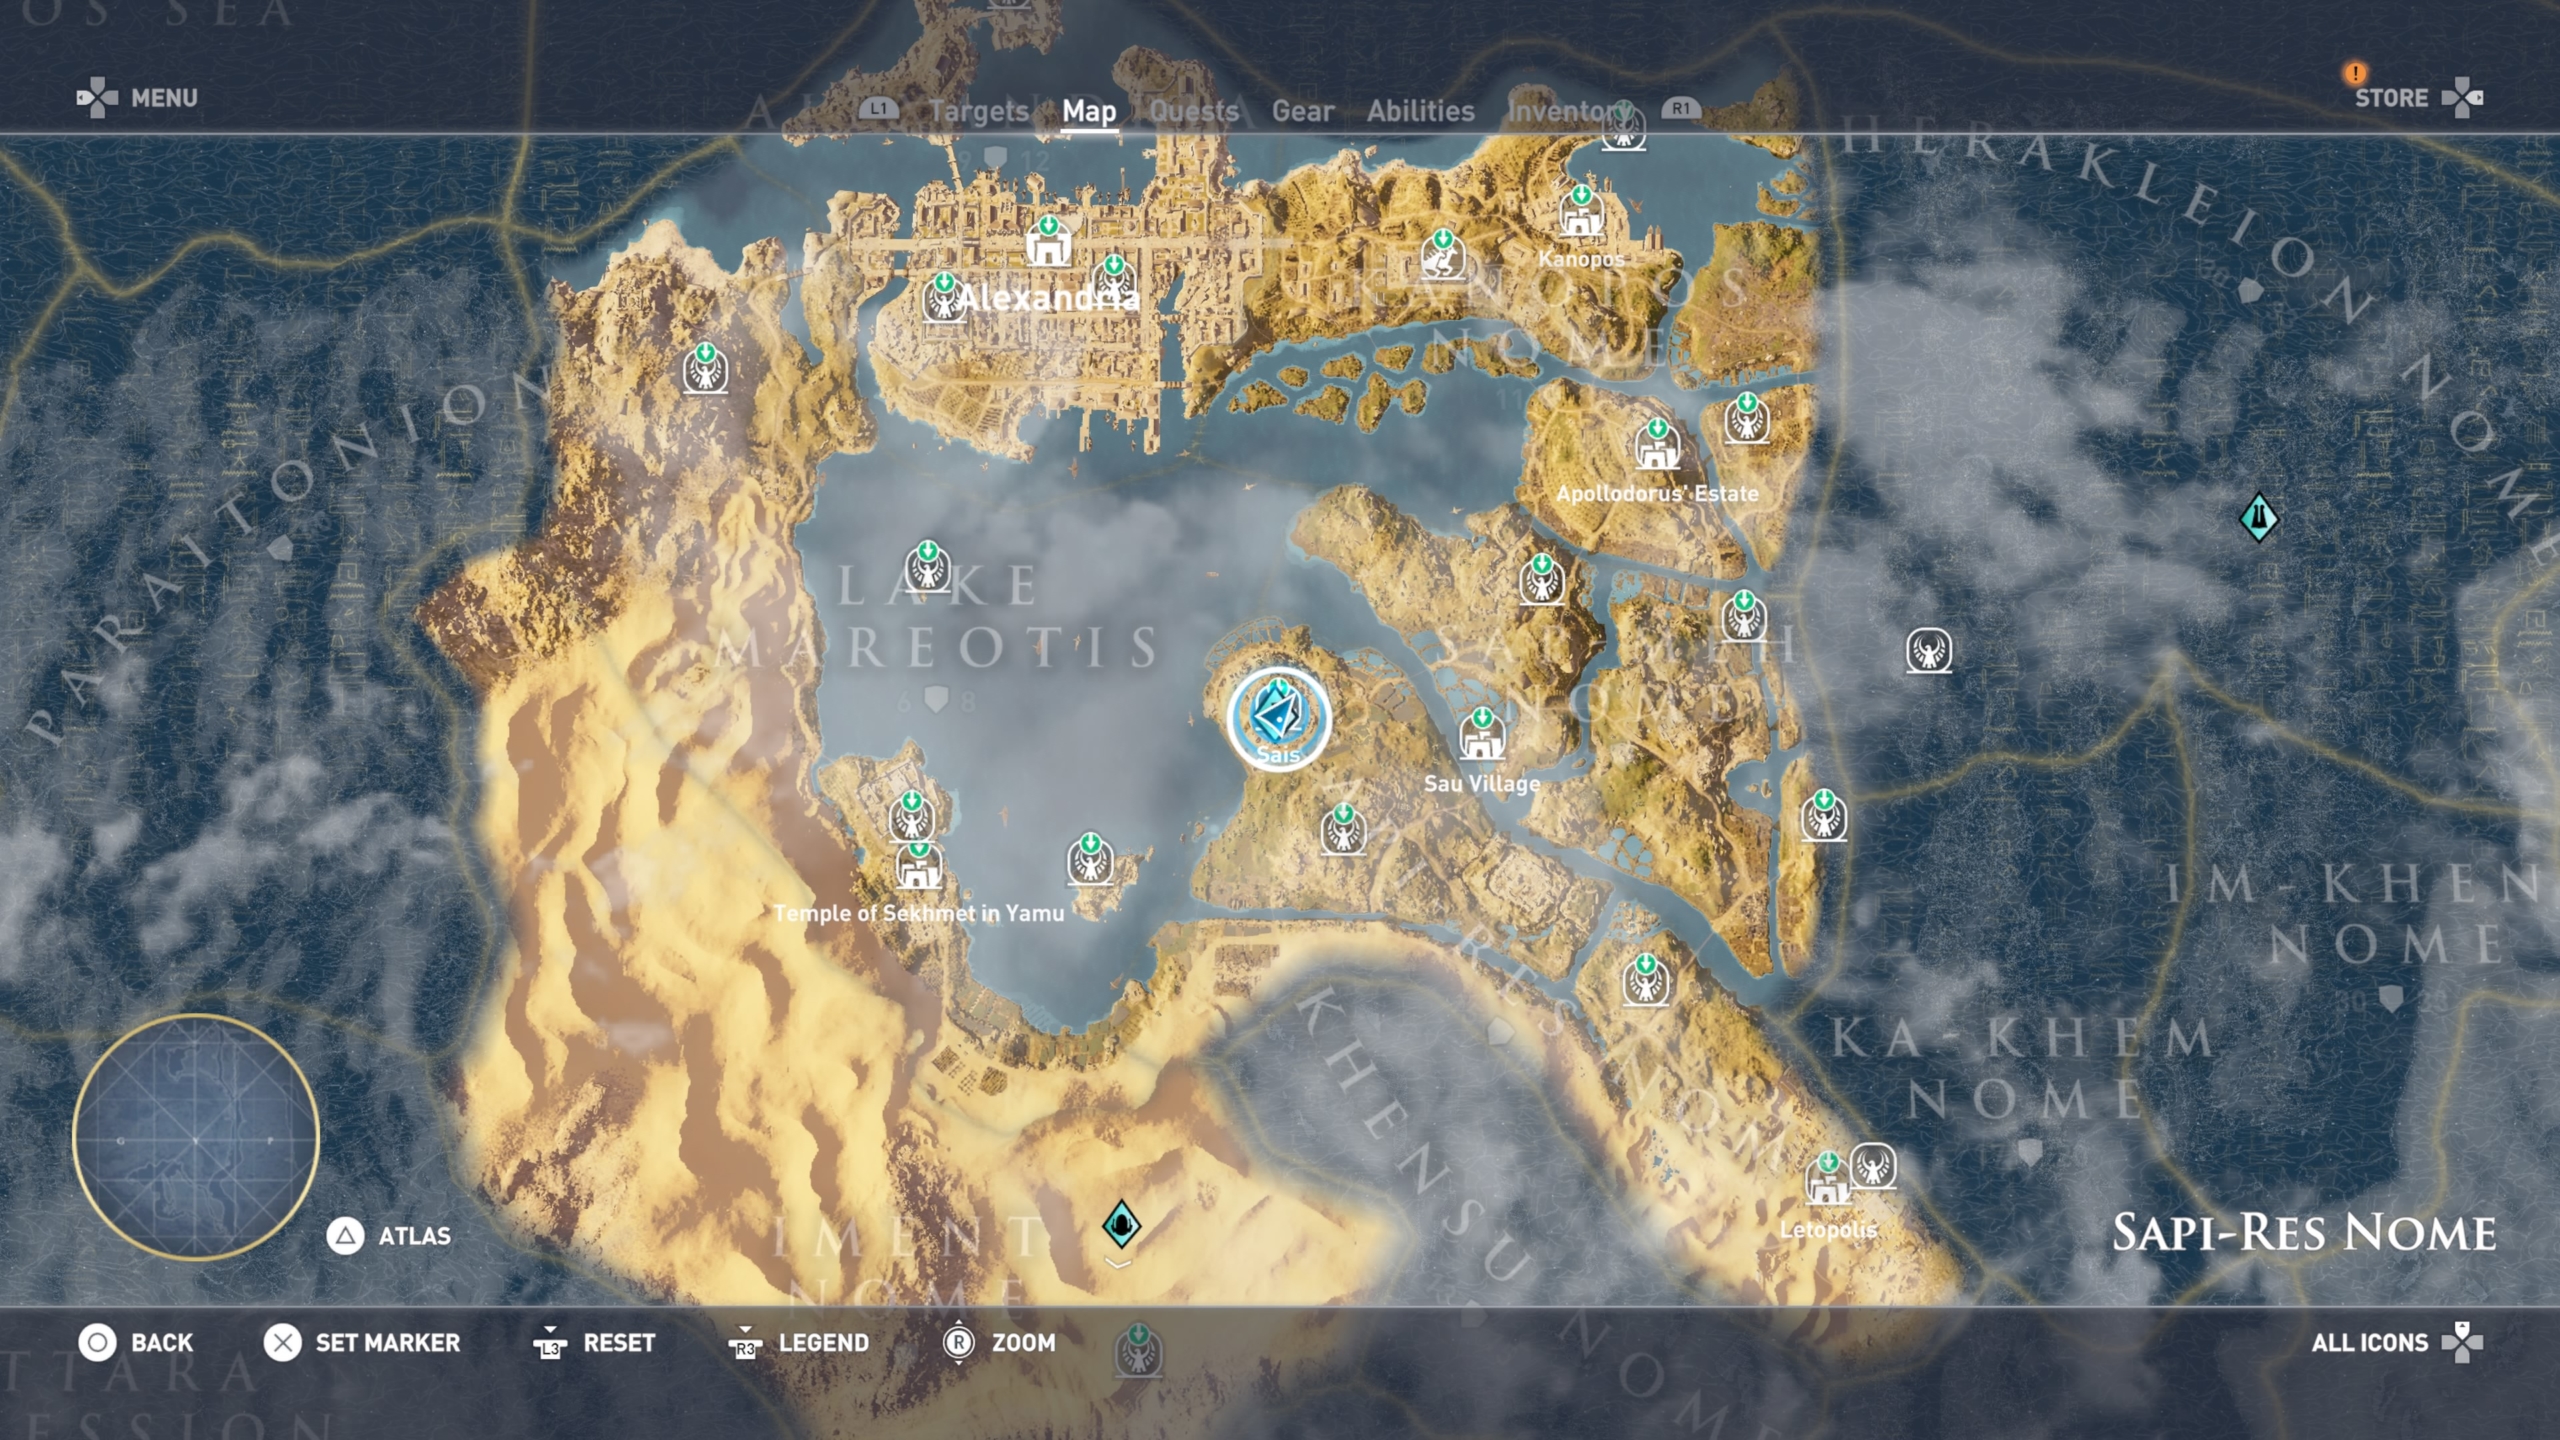 Assassin's Creed Origins Full Map Revealed; Armor Appearance Change In Game  Confirmed